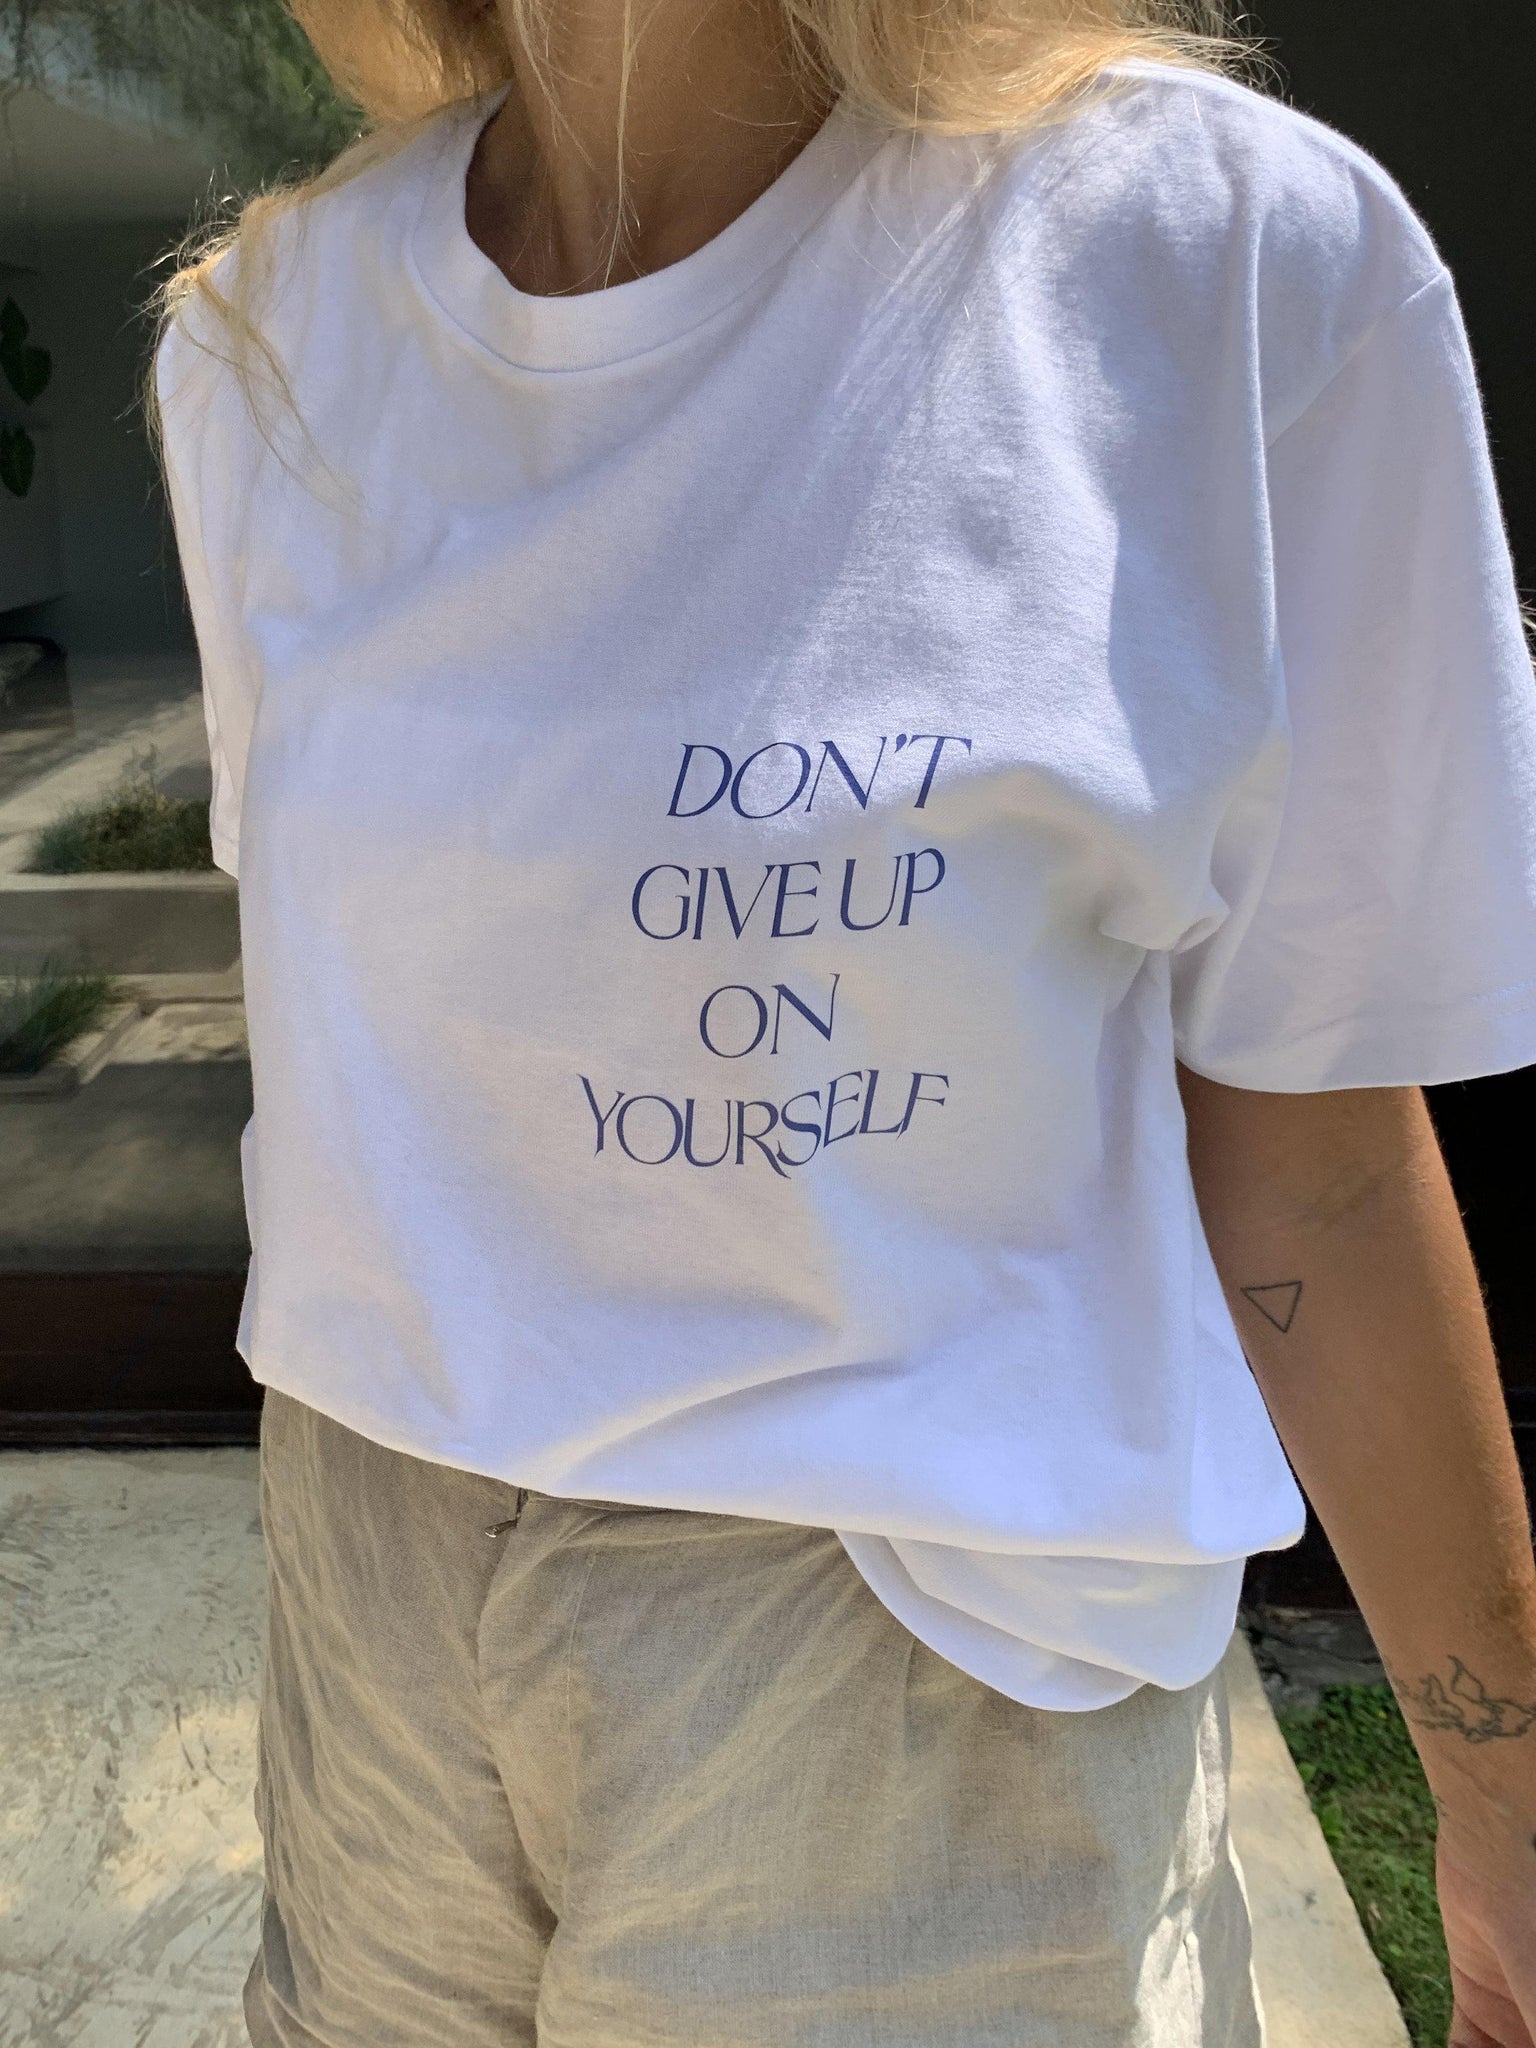 Don't give up on yourself T-Shirt - You Decide Who You Are